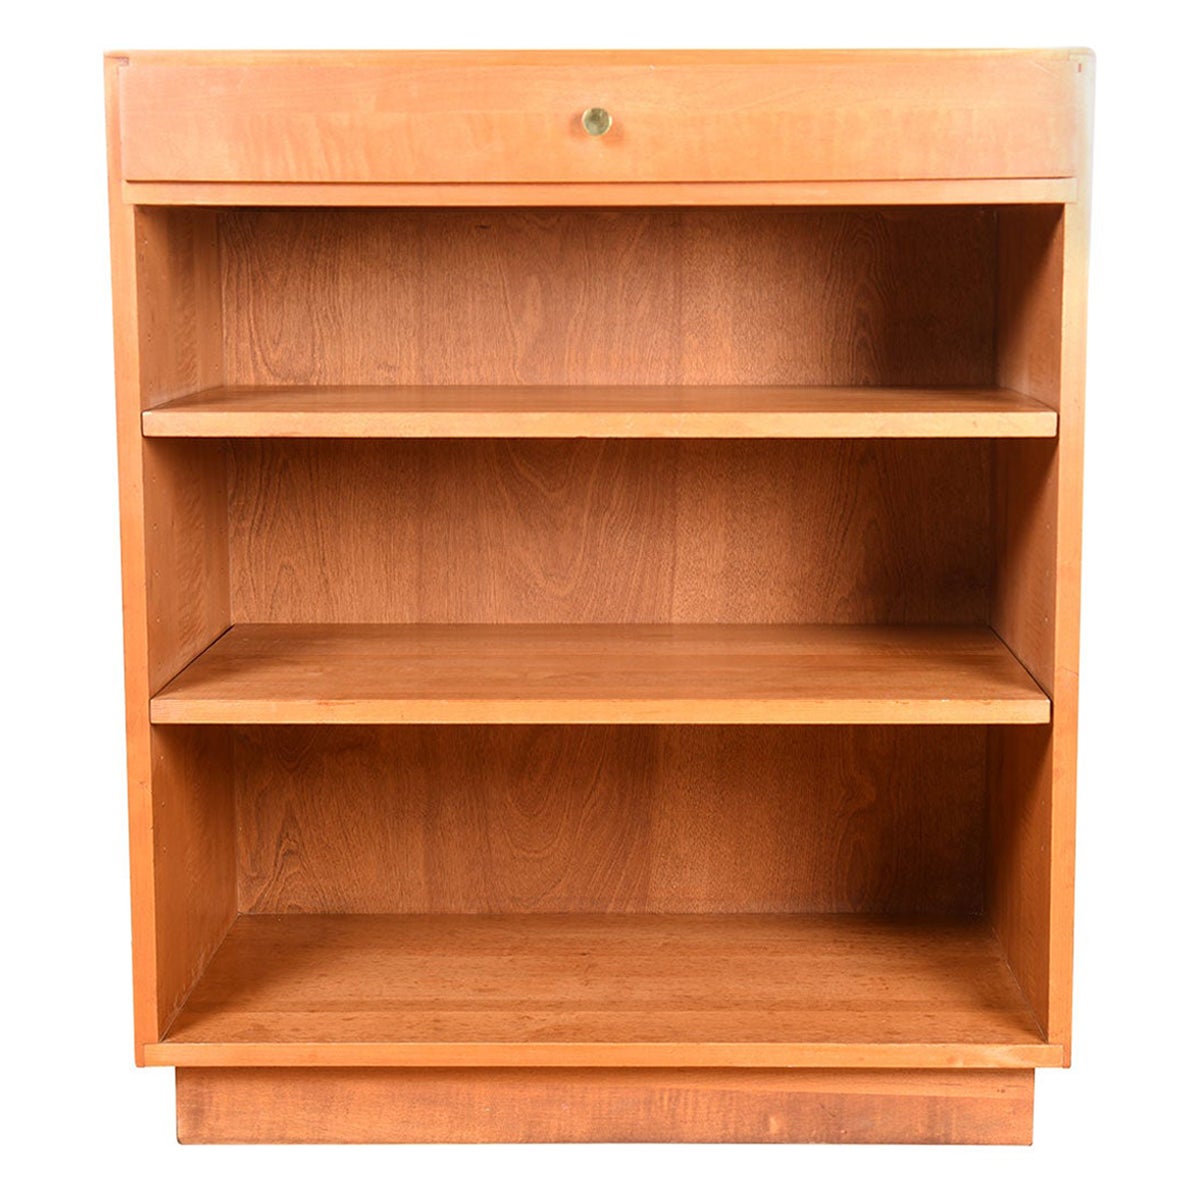 Perfectly Mid-Sized Adj Shelf Bookcase with Drawer in Manner of Paul McCobb For Sale